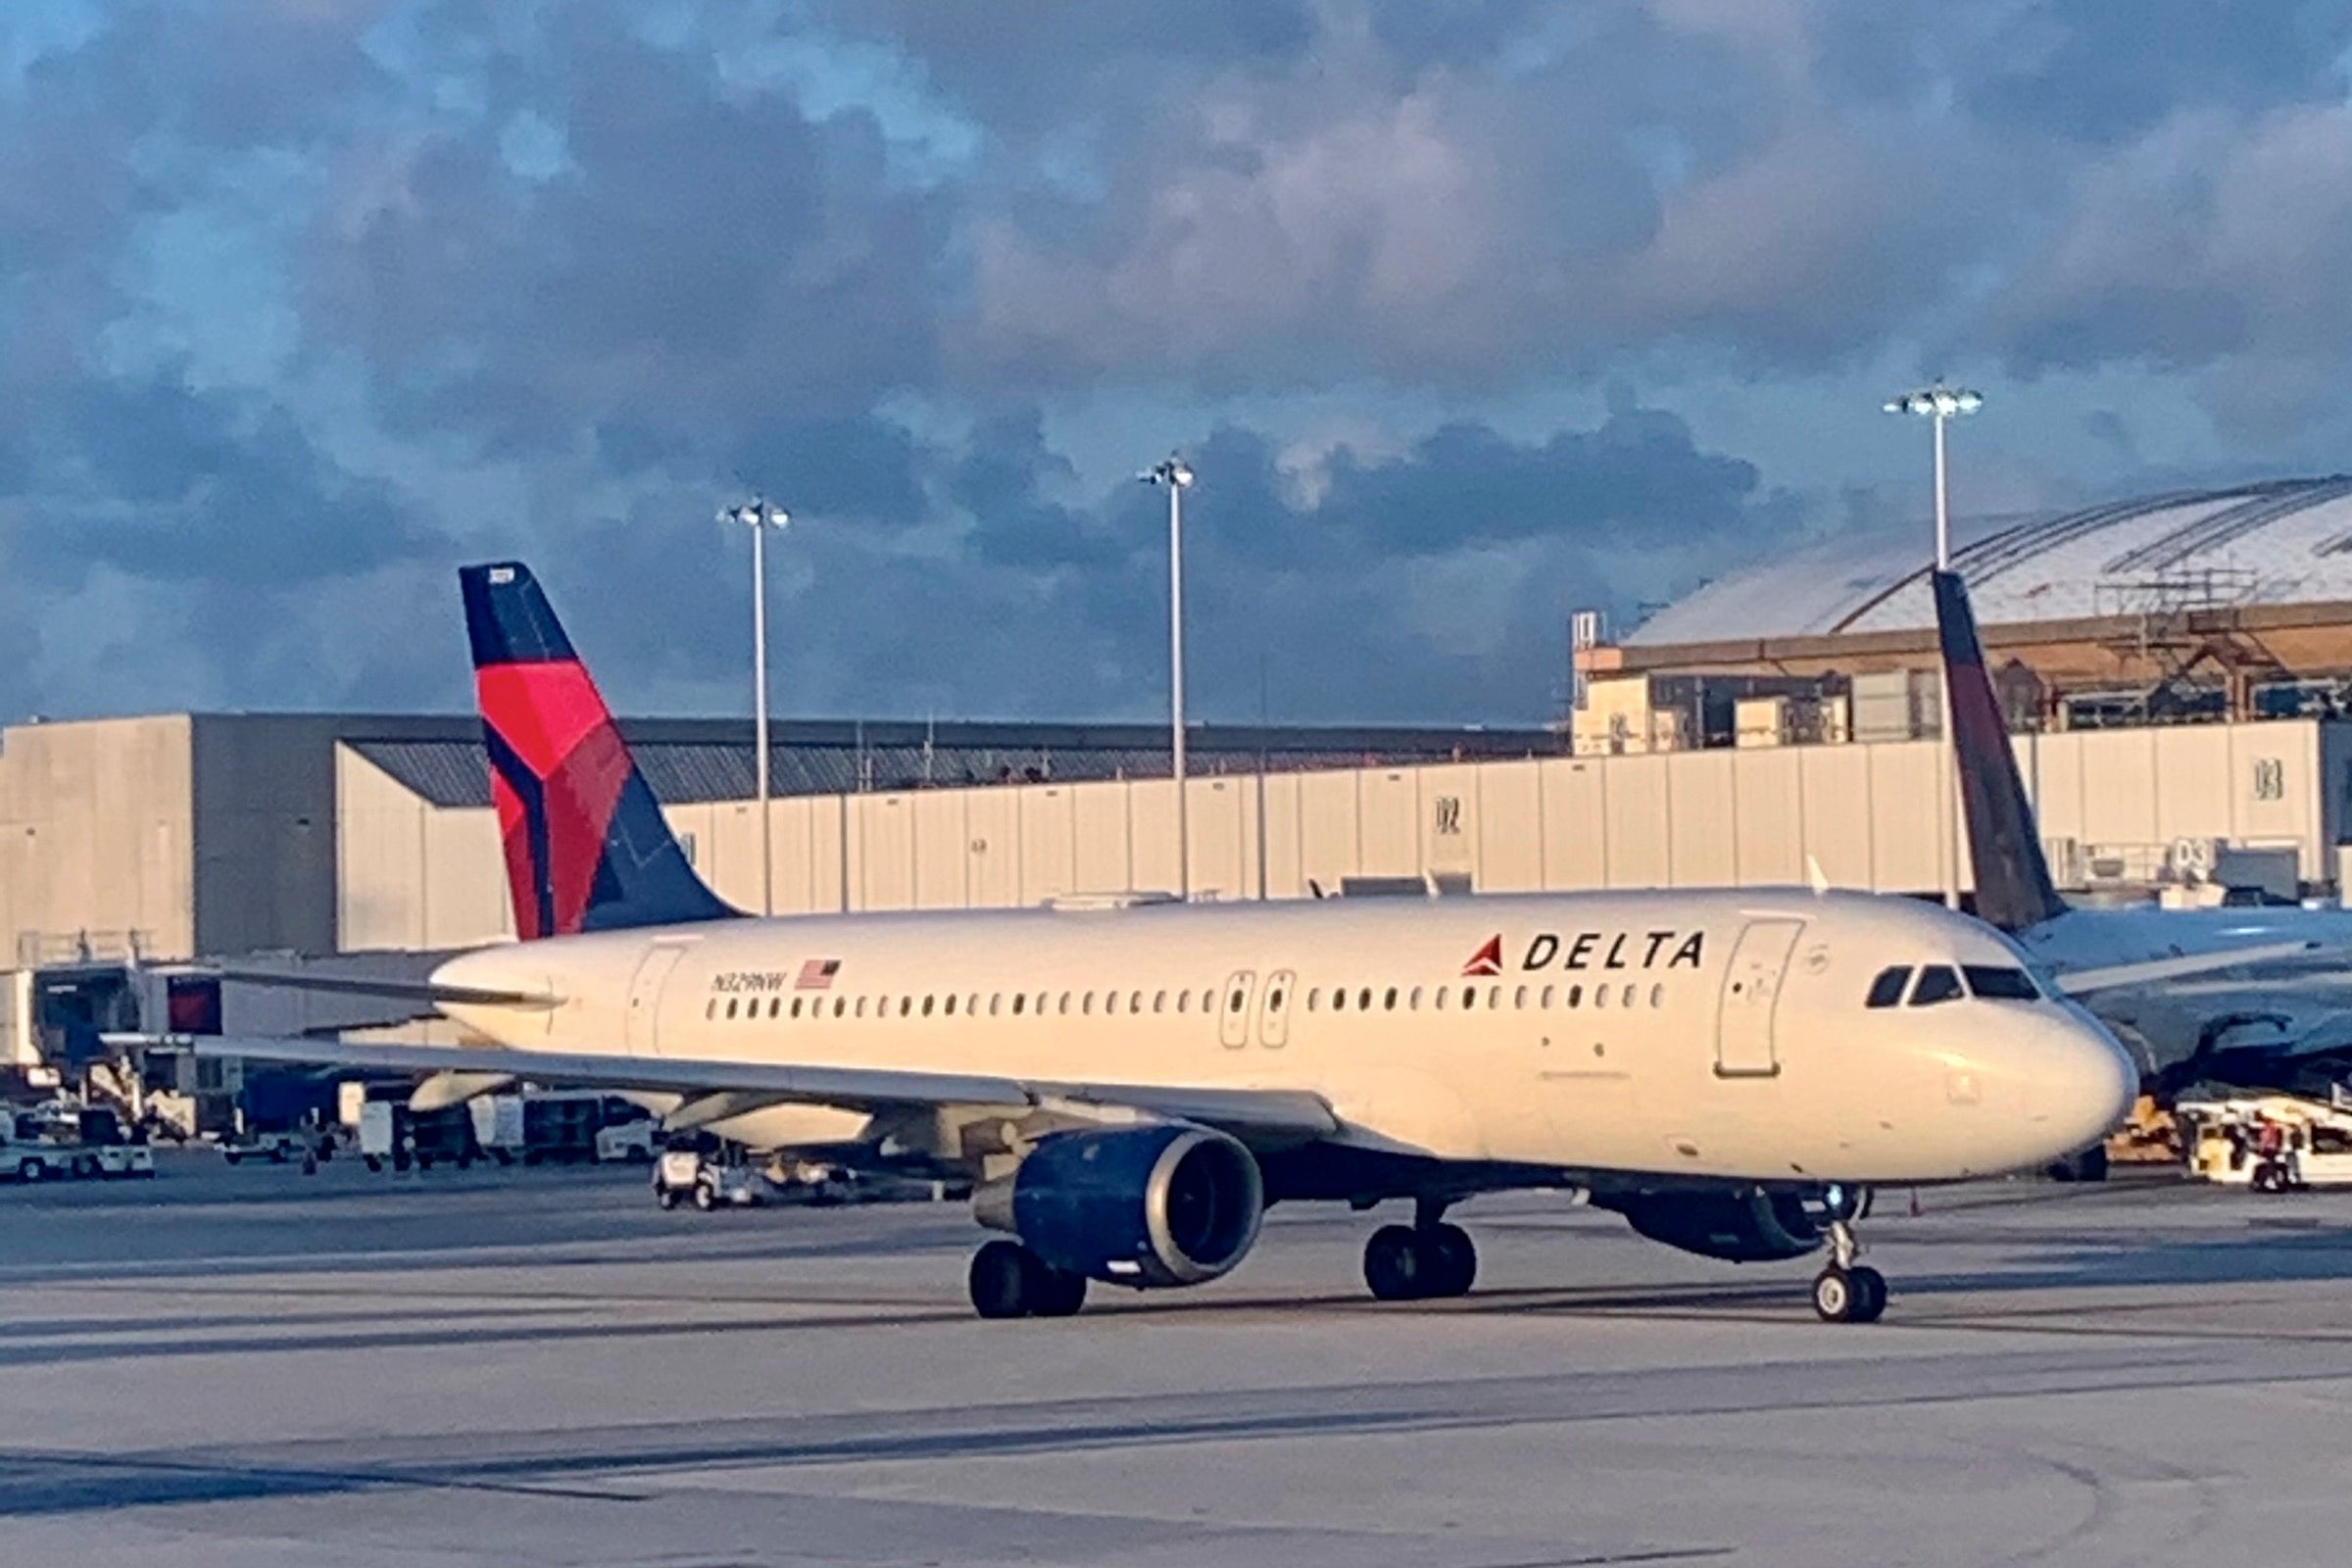 Delta Air Line jet at Fort Lauderdale-Hollywood International Airport (FLL) March 26, 2021 (Photo by Clint Henderson:The Points Guy) copy